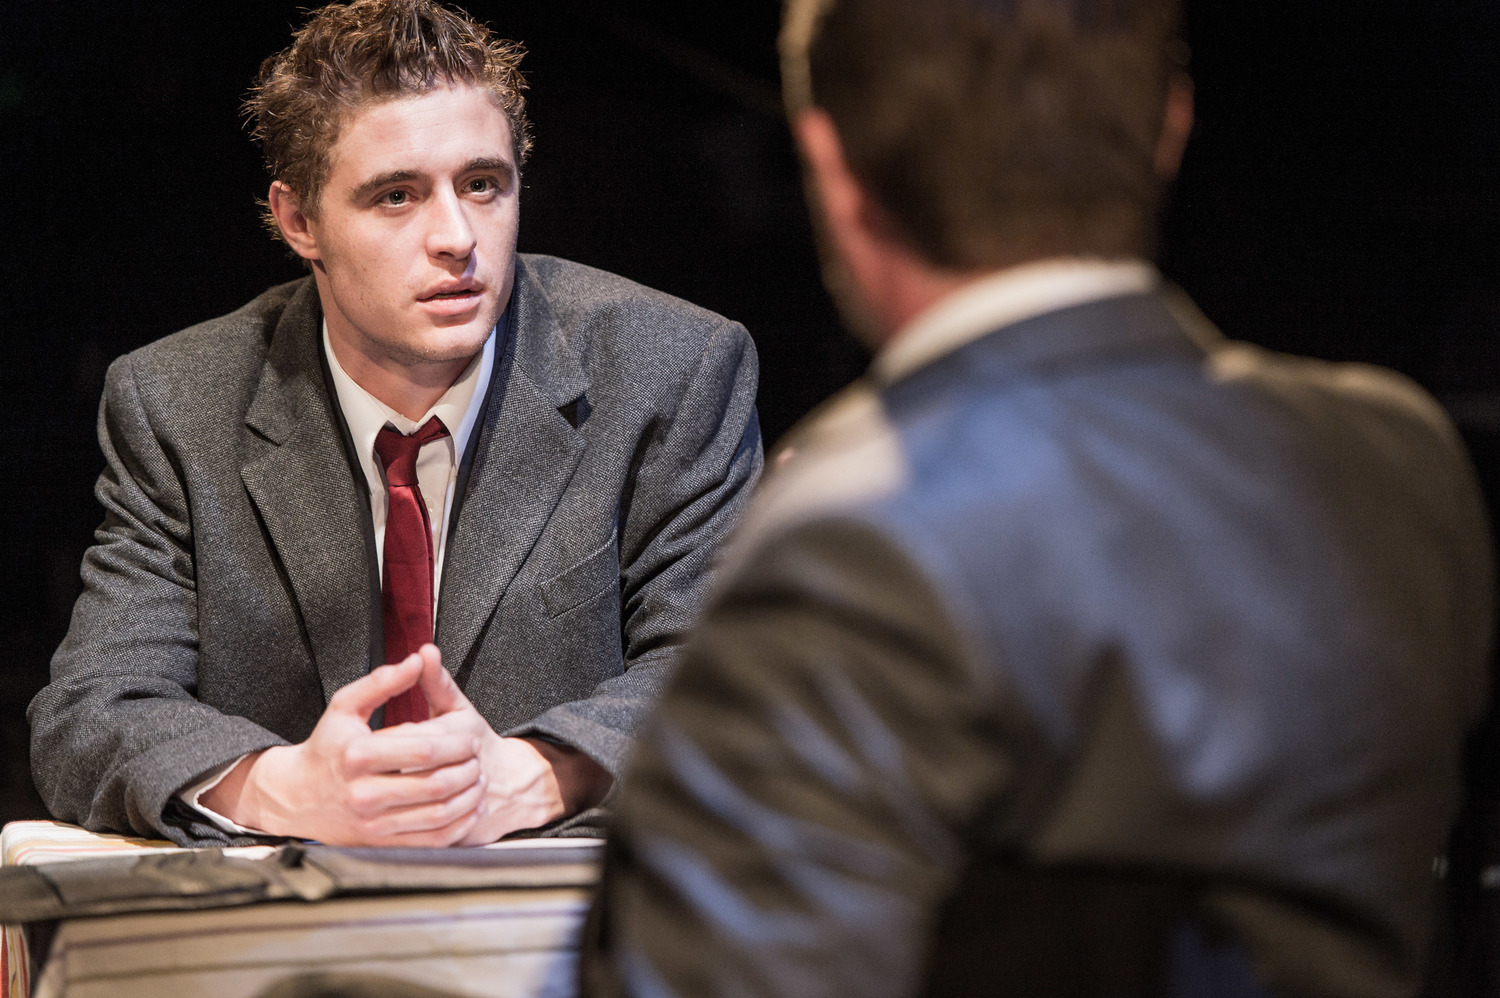 Max Irons in Farragut North, Southwark Playhouse Off West End, composer - Jude Obermüller (photo by Robert Workman)